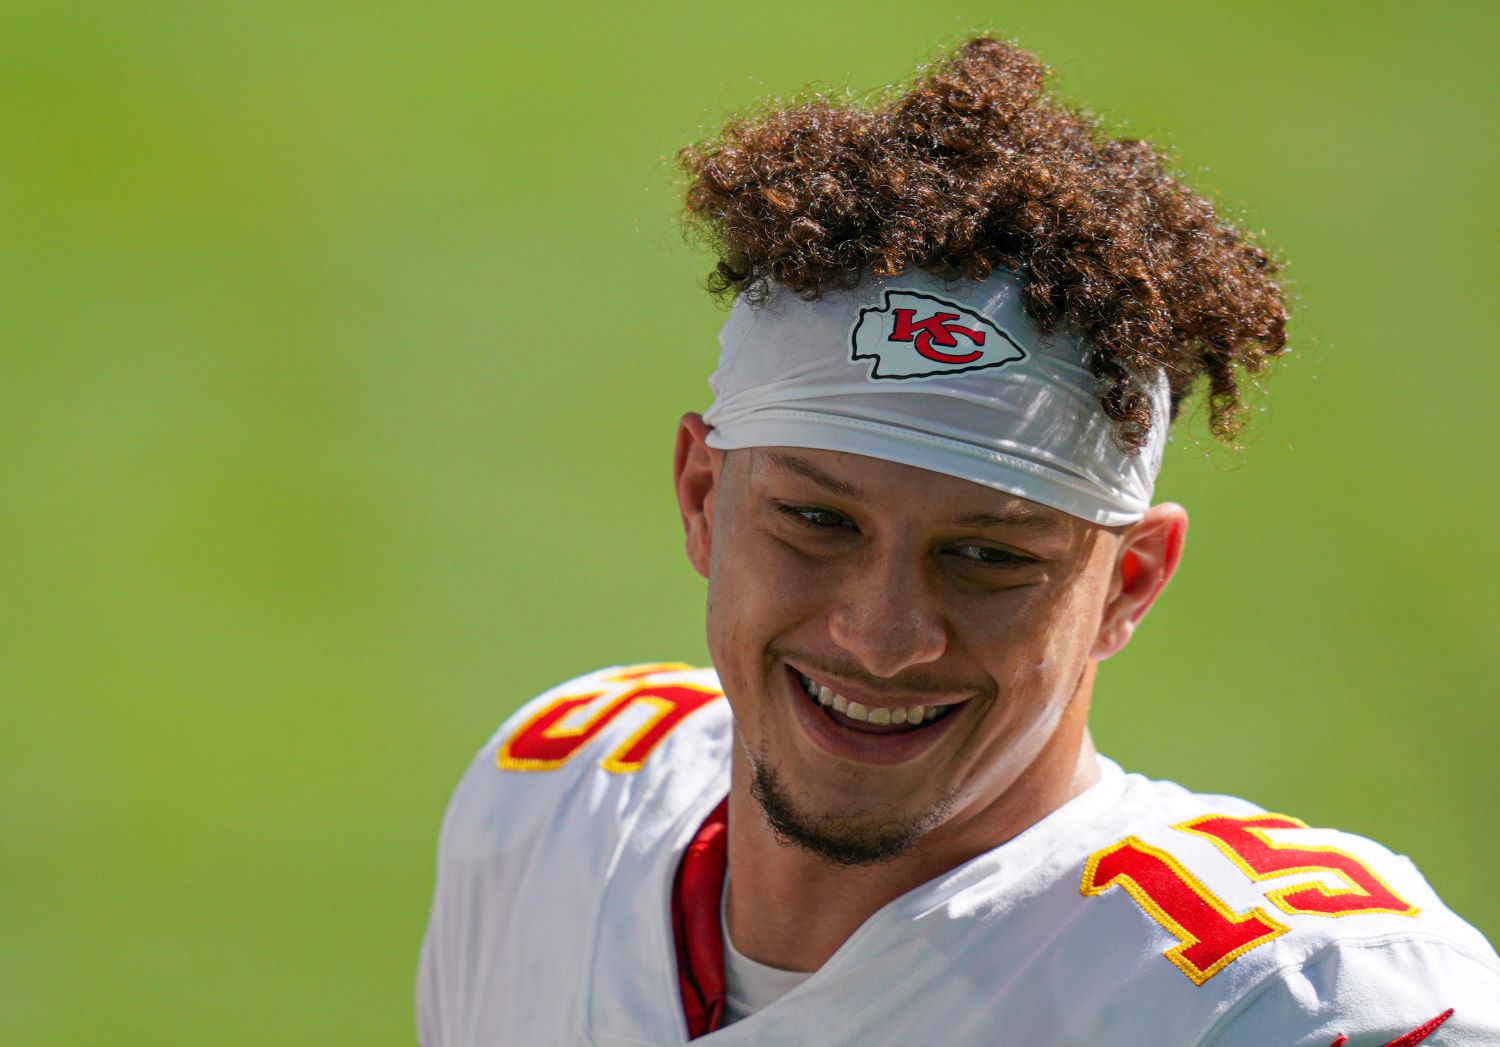 The New Orleans Saints made a major announcement on Friday that should make Patrick Mahomes pleased. But will he regret getting his wish?